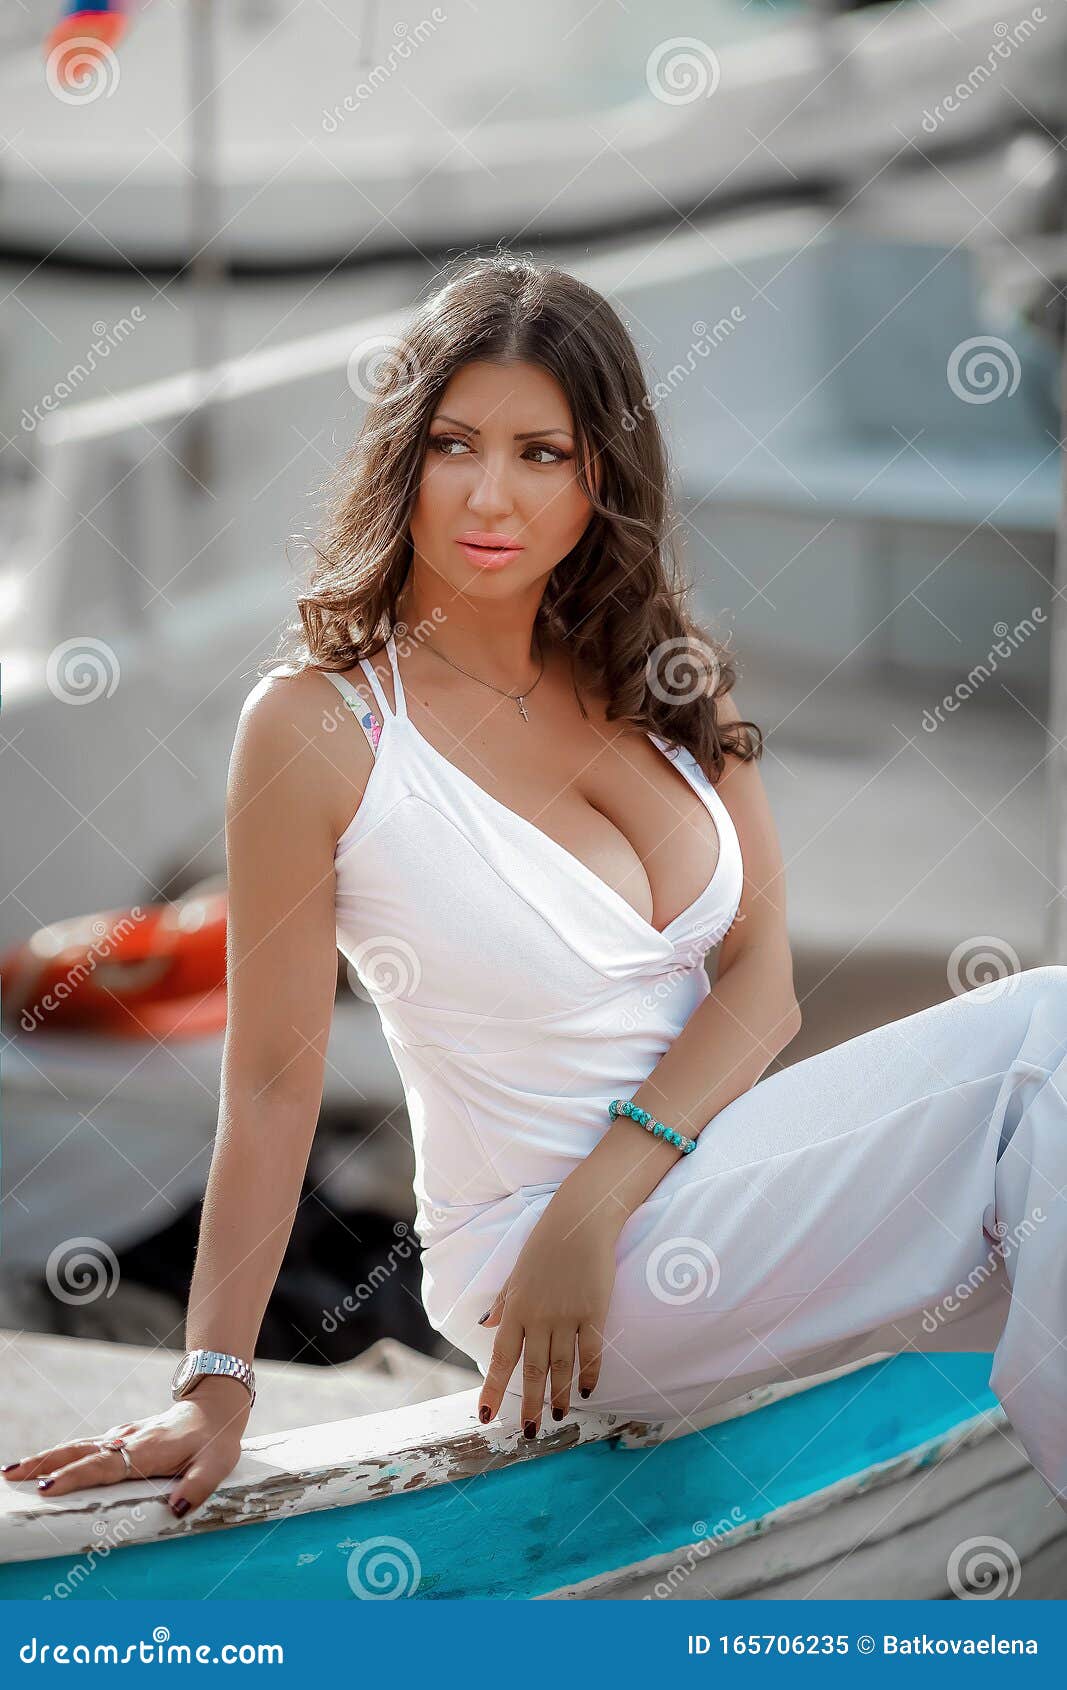 https://thumbs.dreamstime.com/z/close-up-beautiful-figure-woman-dressed-white-tight-fitting-sexy-body-suit-close-up-beautiful-figure-woman-dressed-white-165706235.jpg